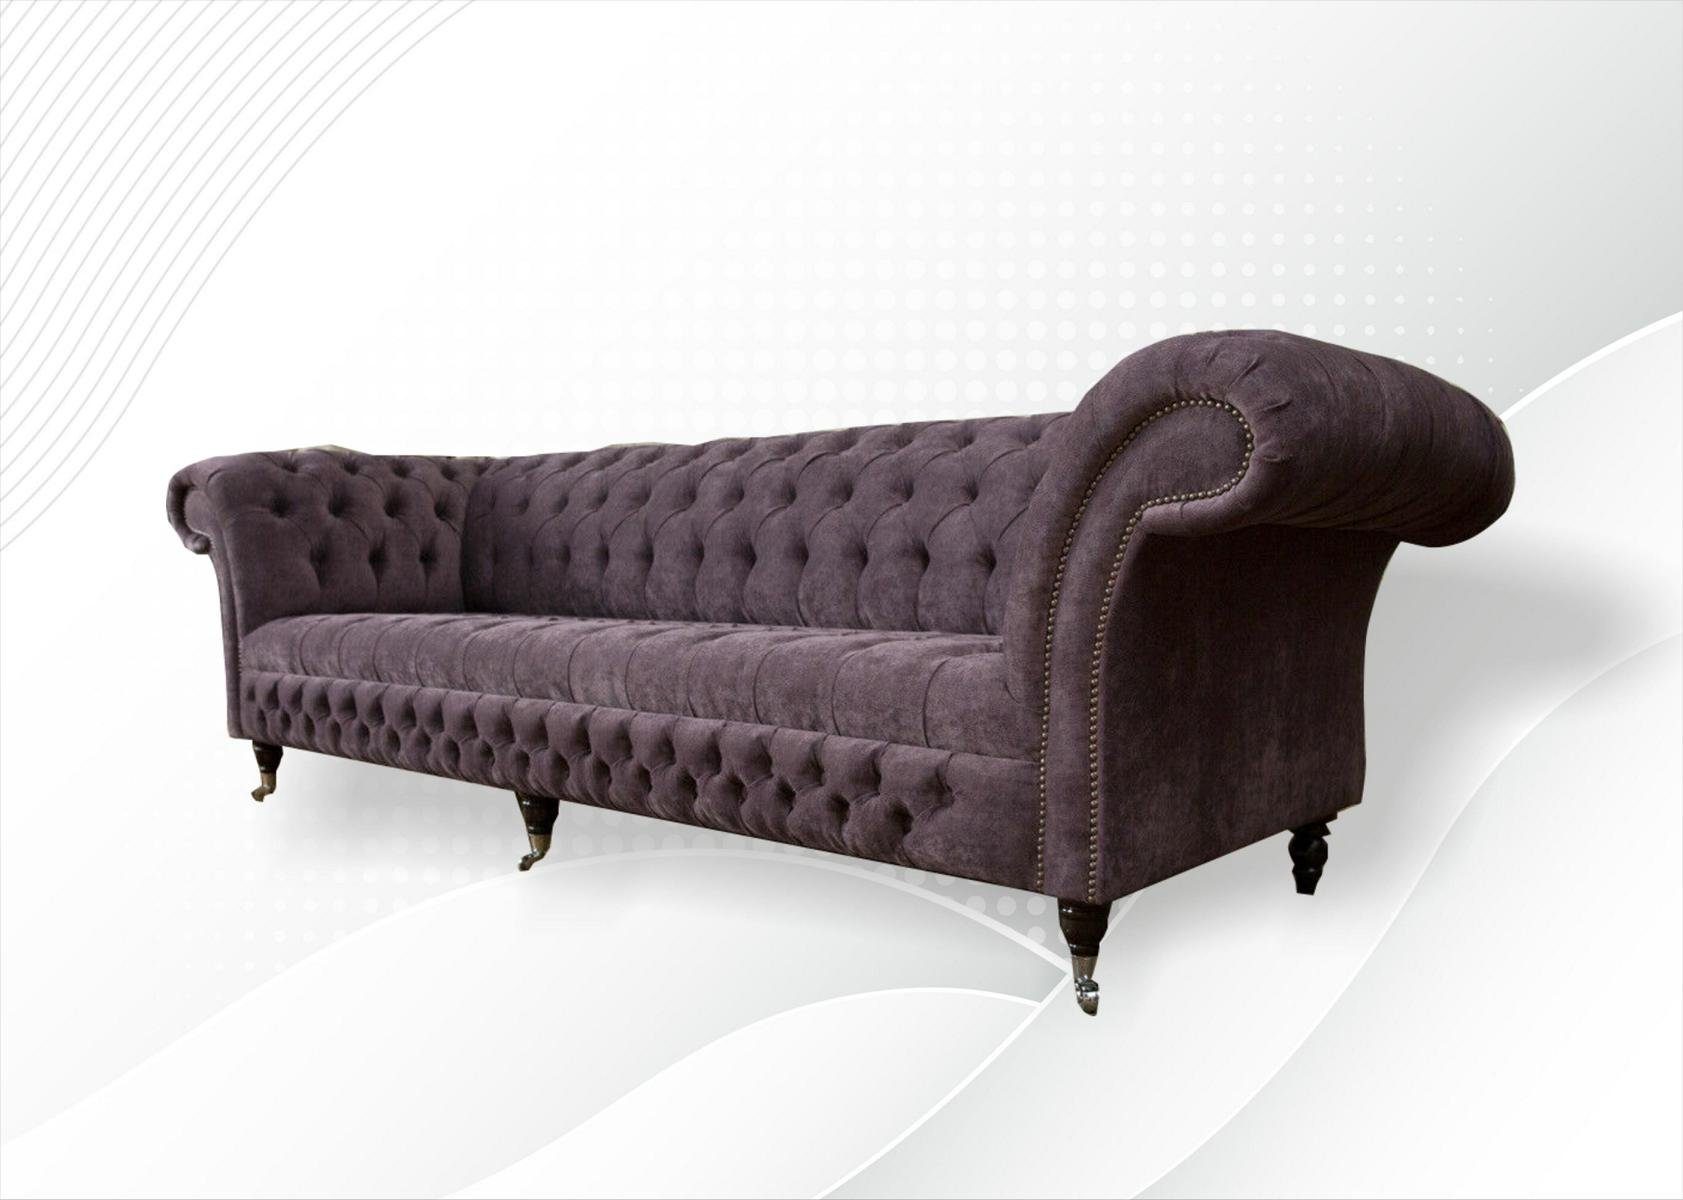 Made 4 Chesterfield xxl Sitzer Sofas Big in 265cm Polster Sofa Sofa JVmoebel Europe Couch Leder,